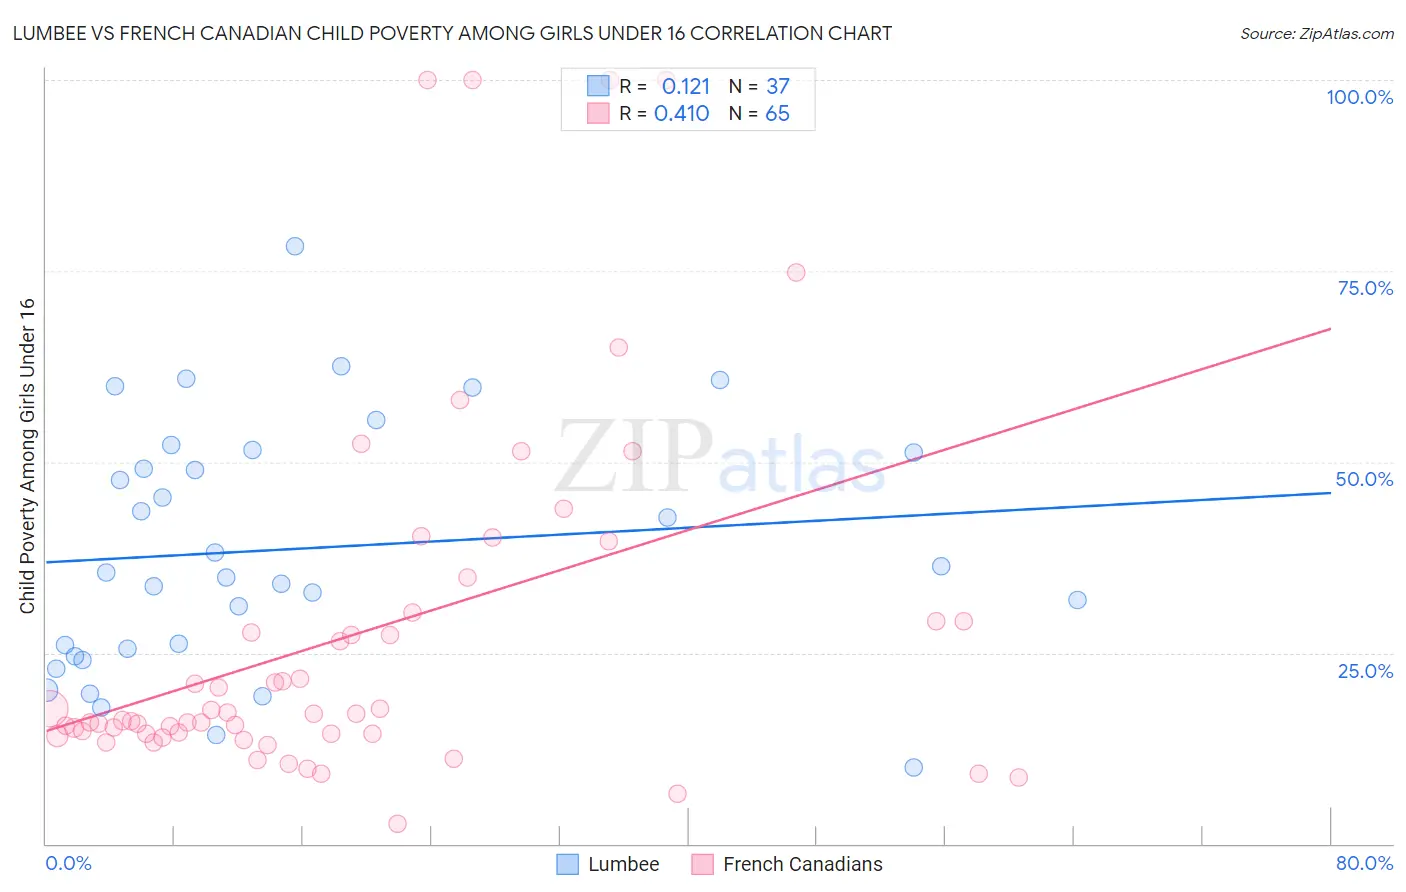 Lumbee vs French Canadian Child Poverty Among Girls Under 16